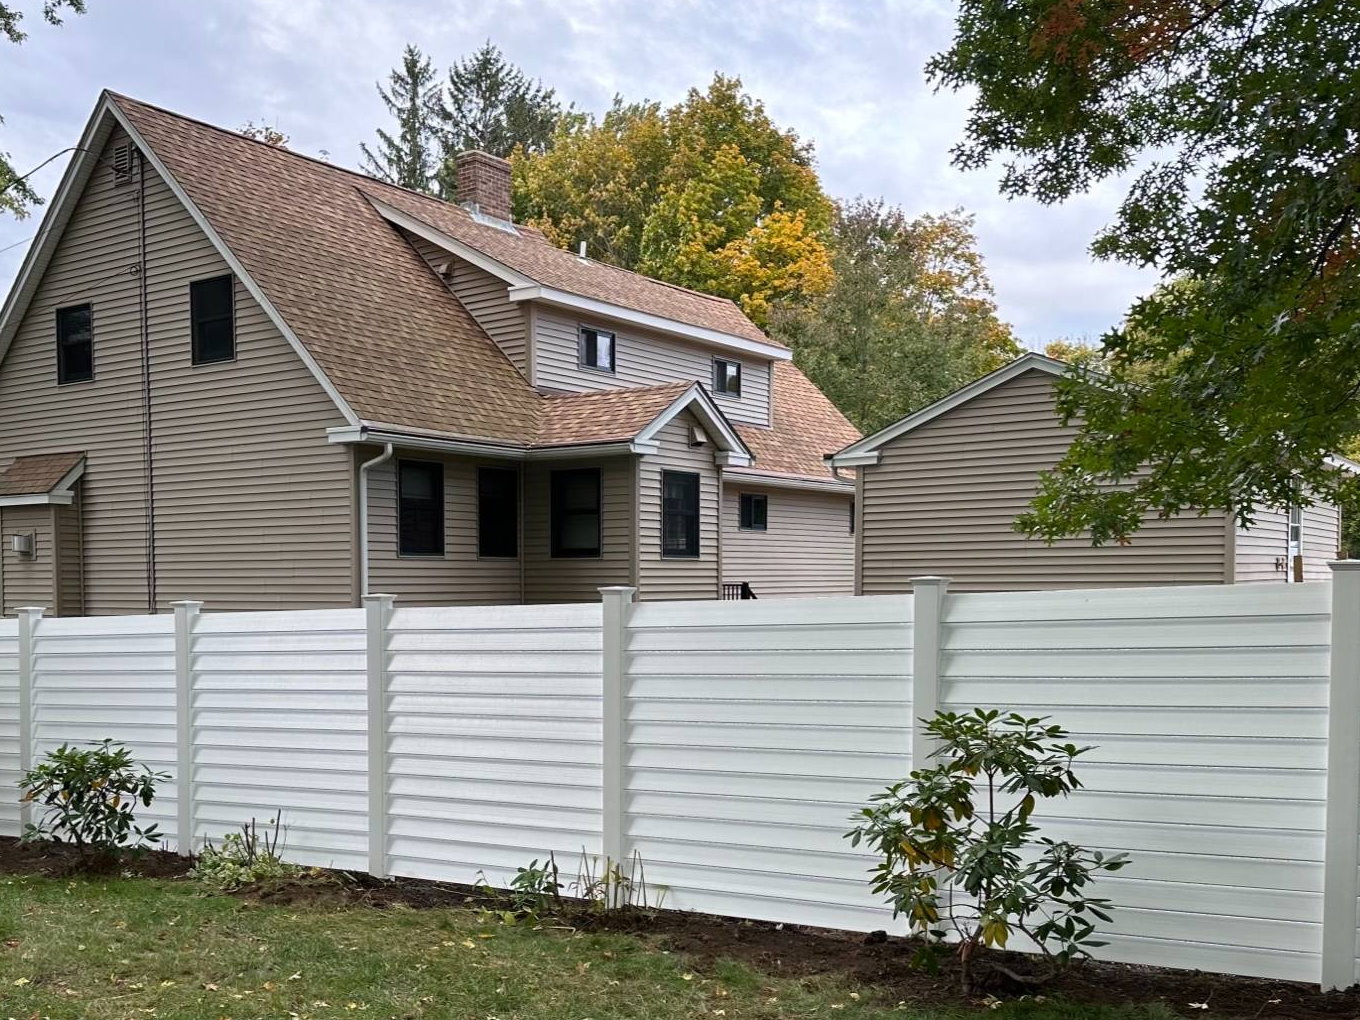 North Andover Massachusetts Fence Project Photo